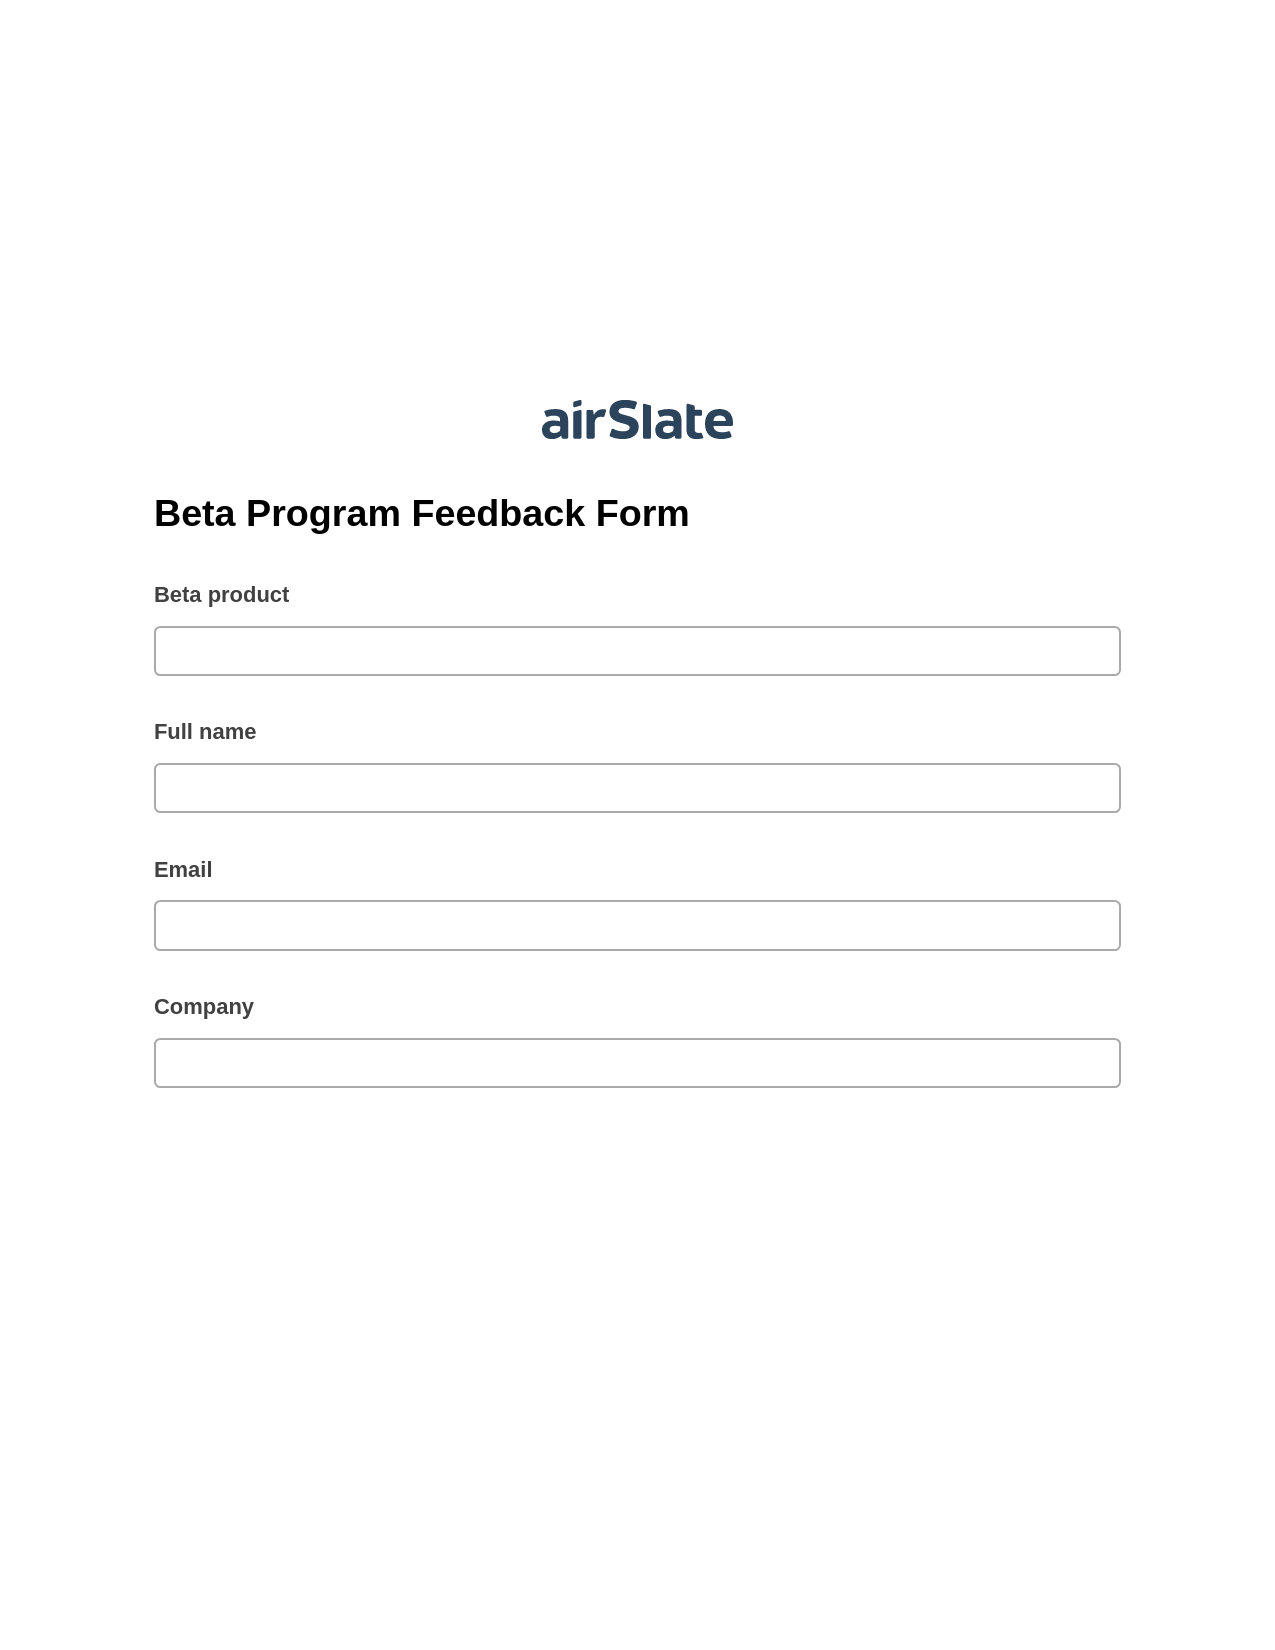 Multirole Beta Program Feedback Form Pre-fill Dropdown from Airtable, Roles Reminder Bot, Export to Smartsheet